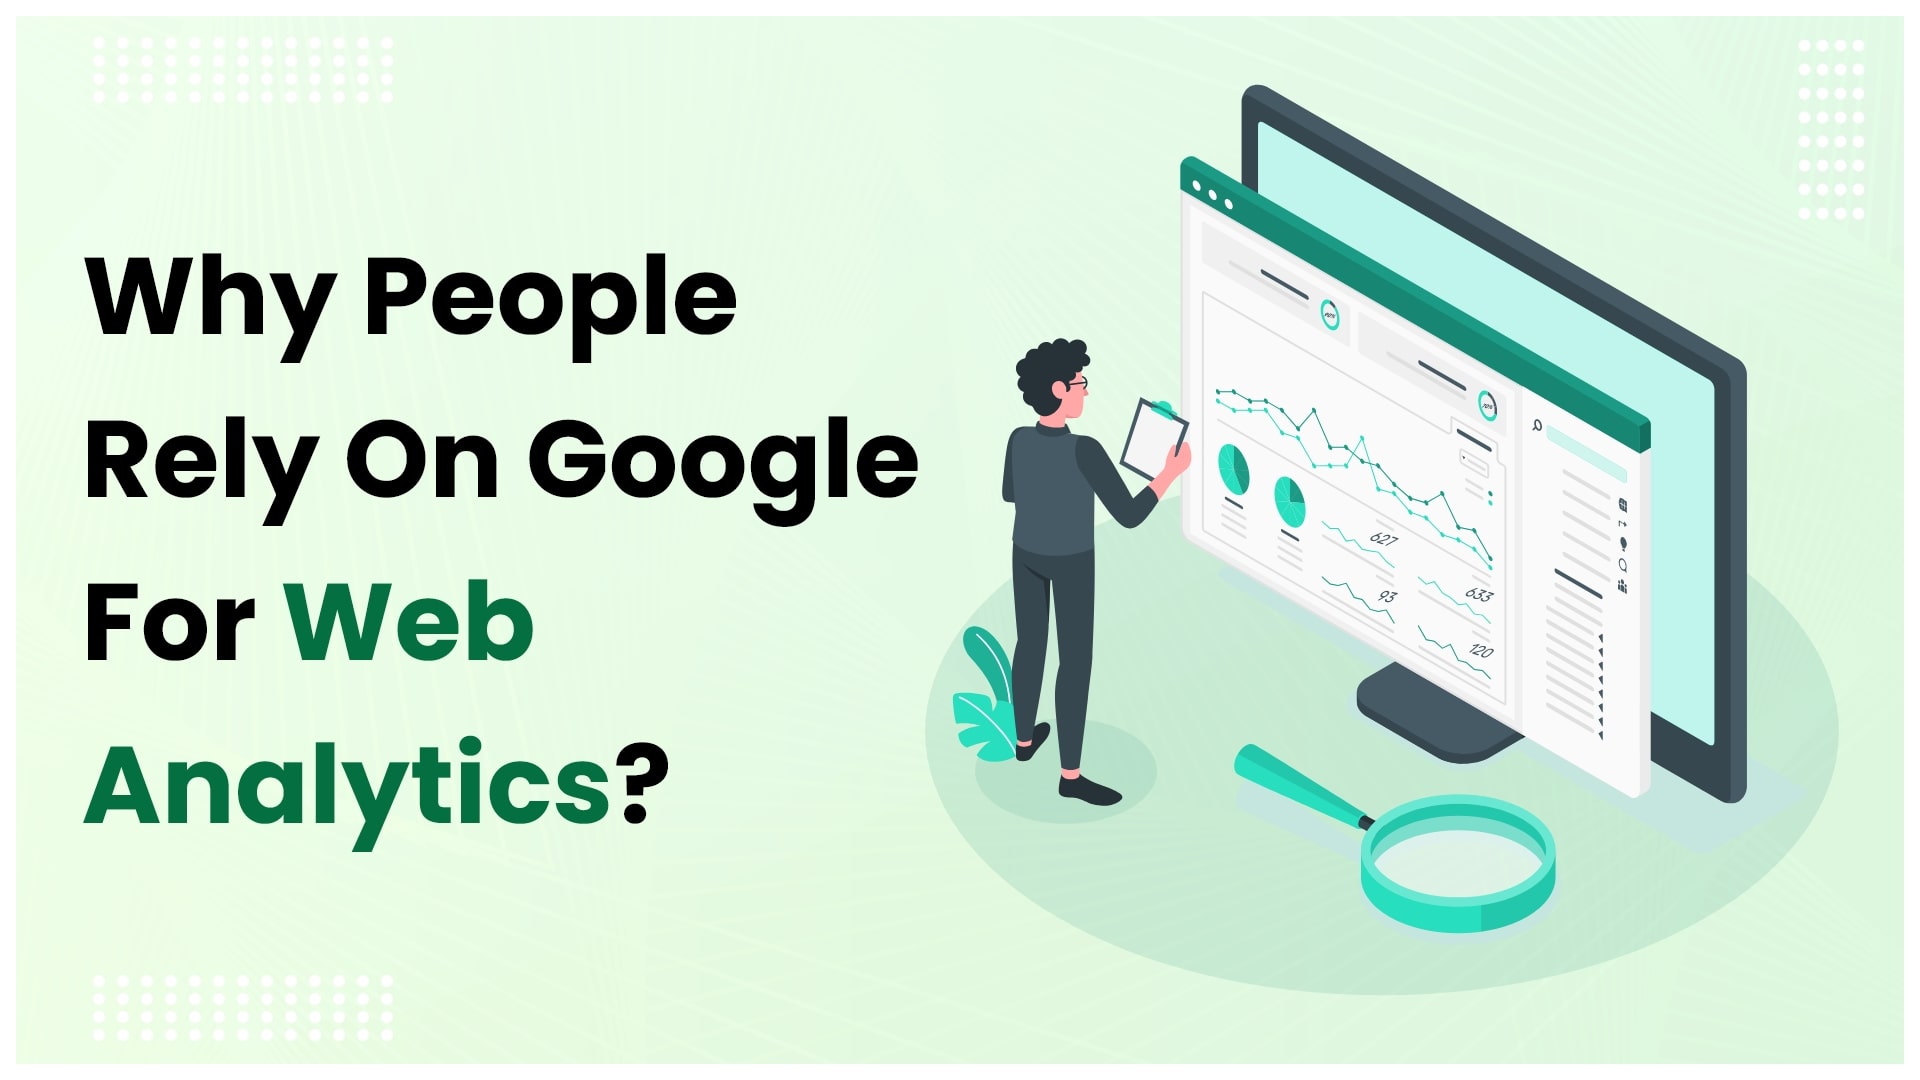 Why People Rely On Google For Web Analytics